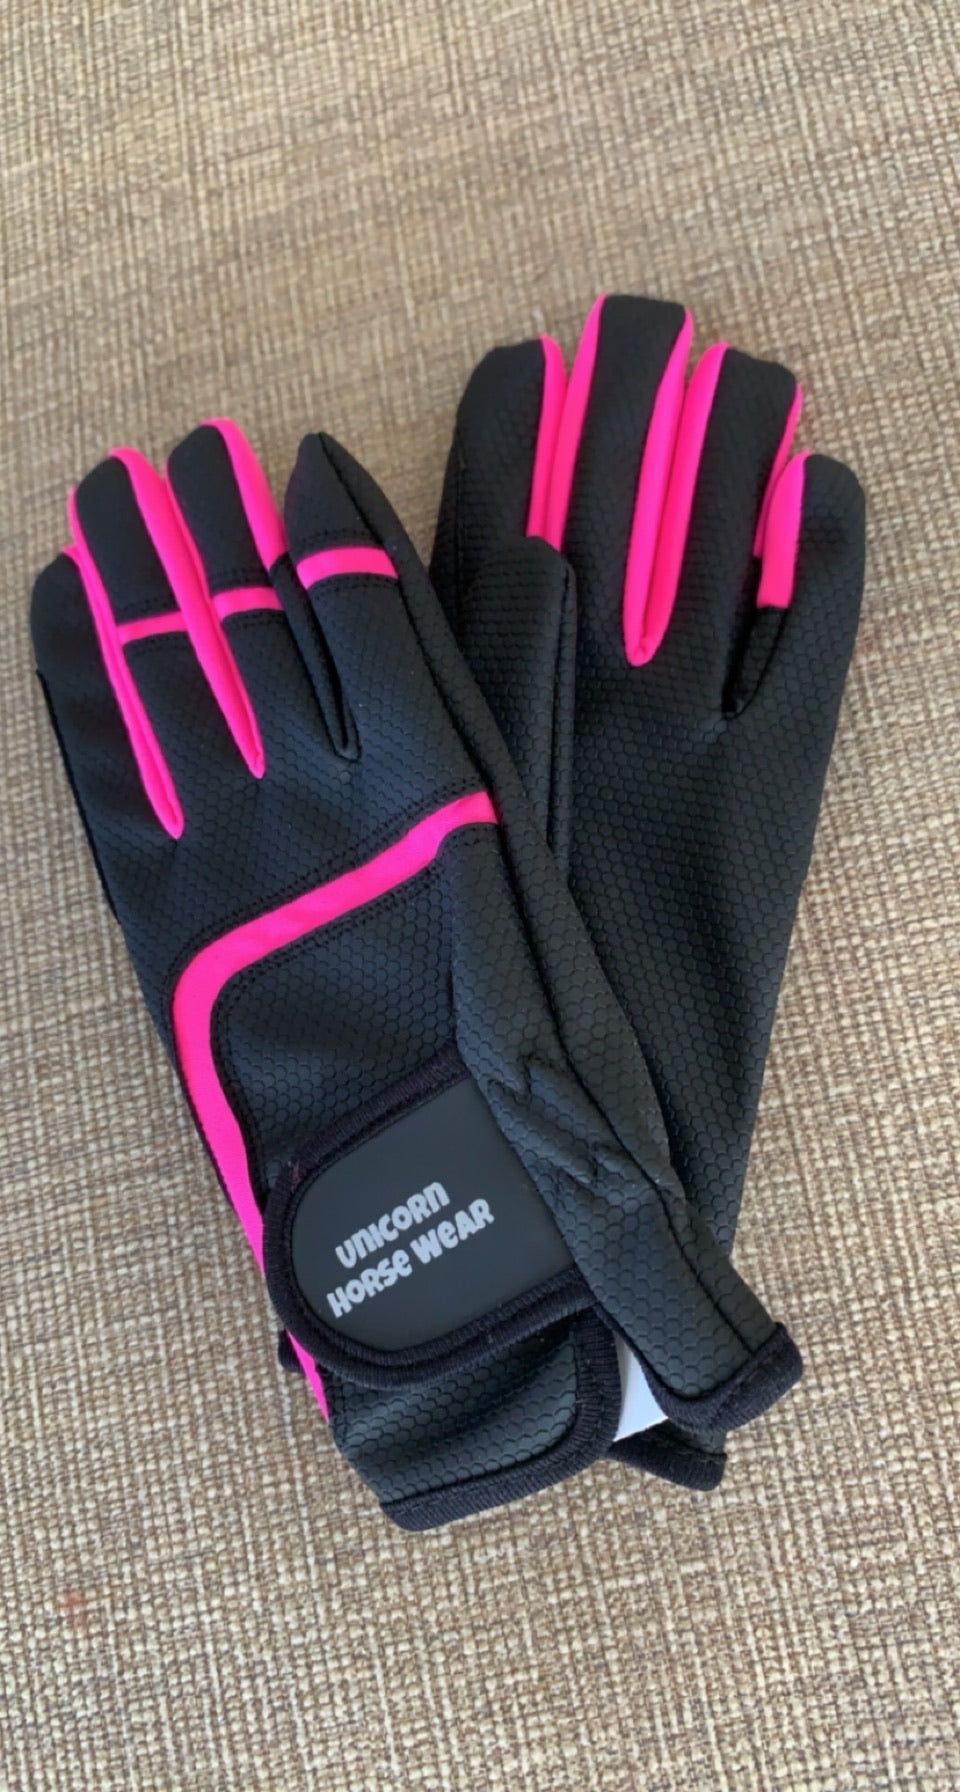 Child’s Pink Riding Gloves